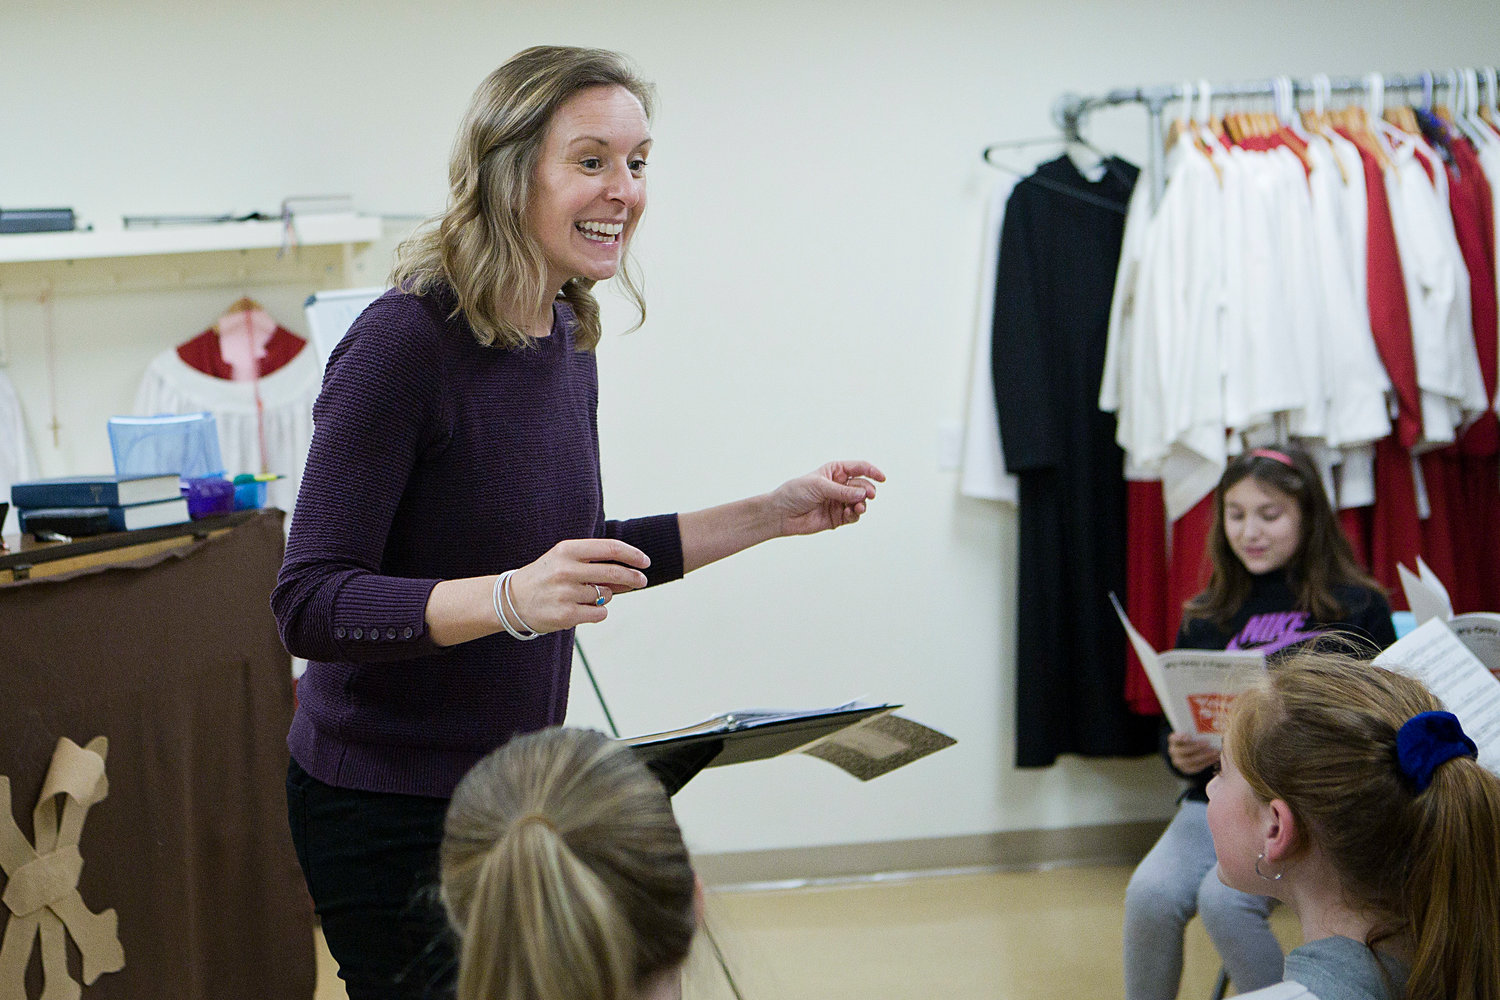 Newport County Youth Choir director Elizabeth Woodhouse sings along with her group during a practice session held at St. Mary's Episcopal Church.